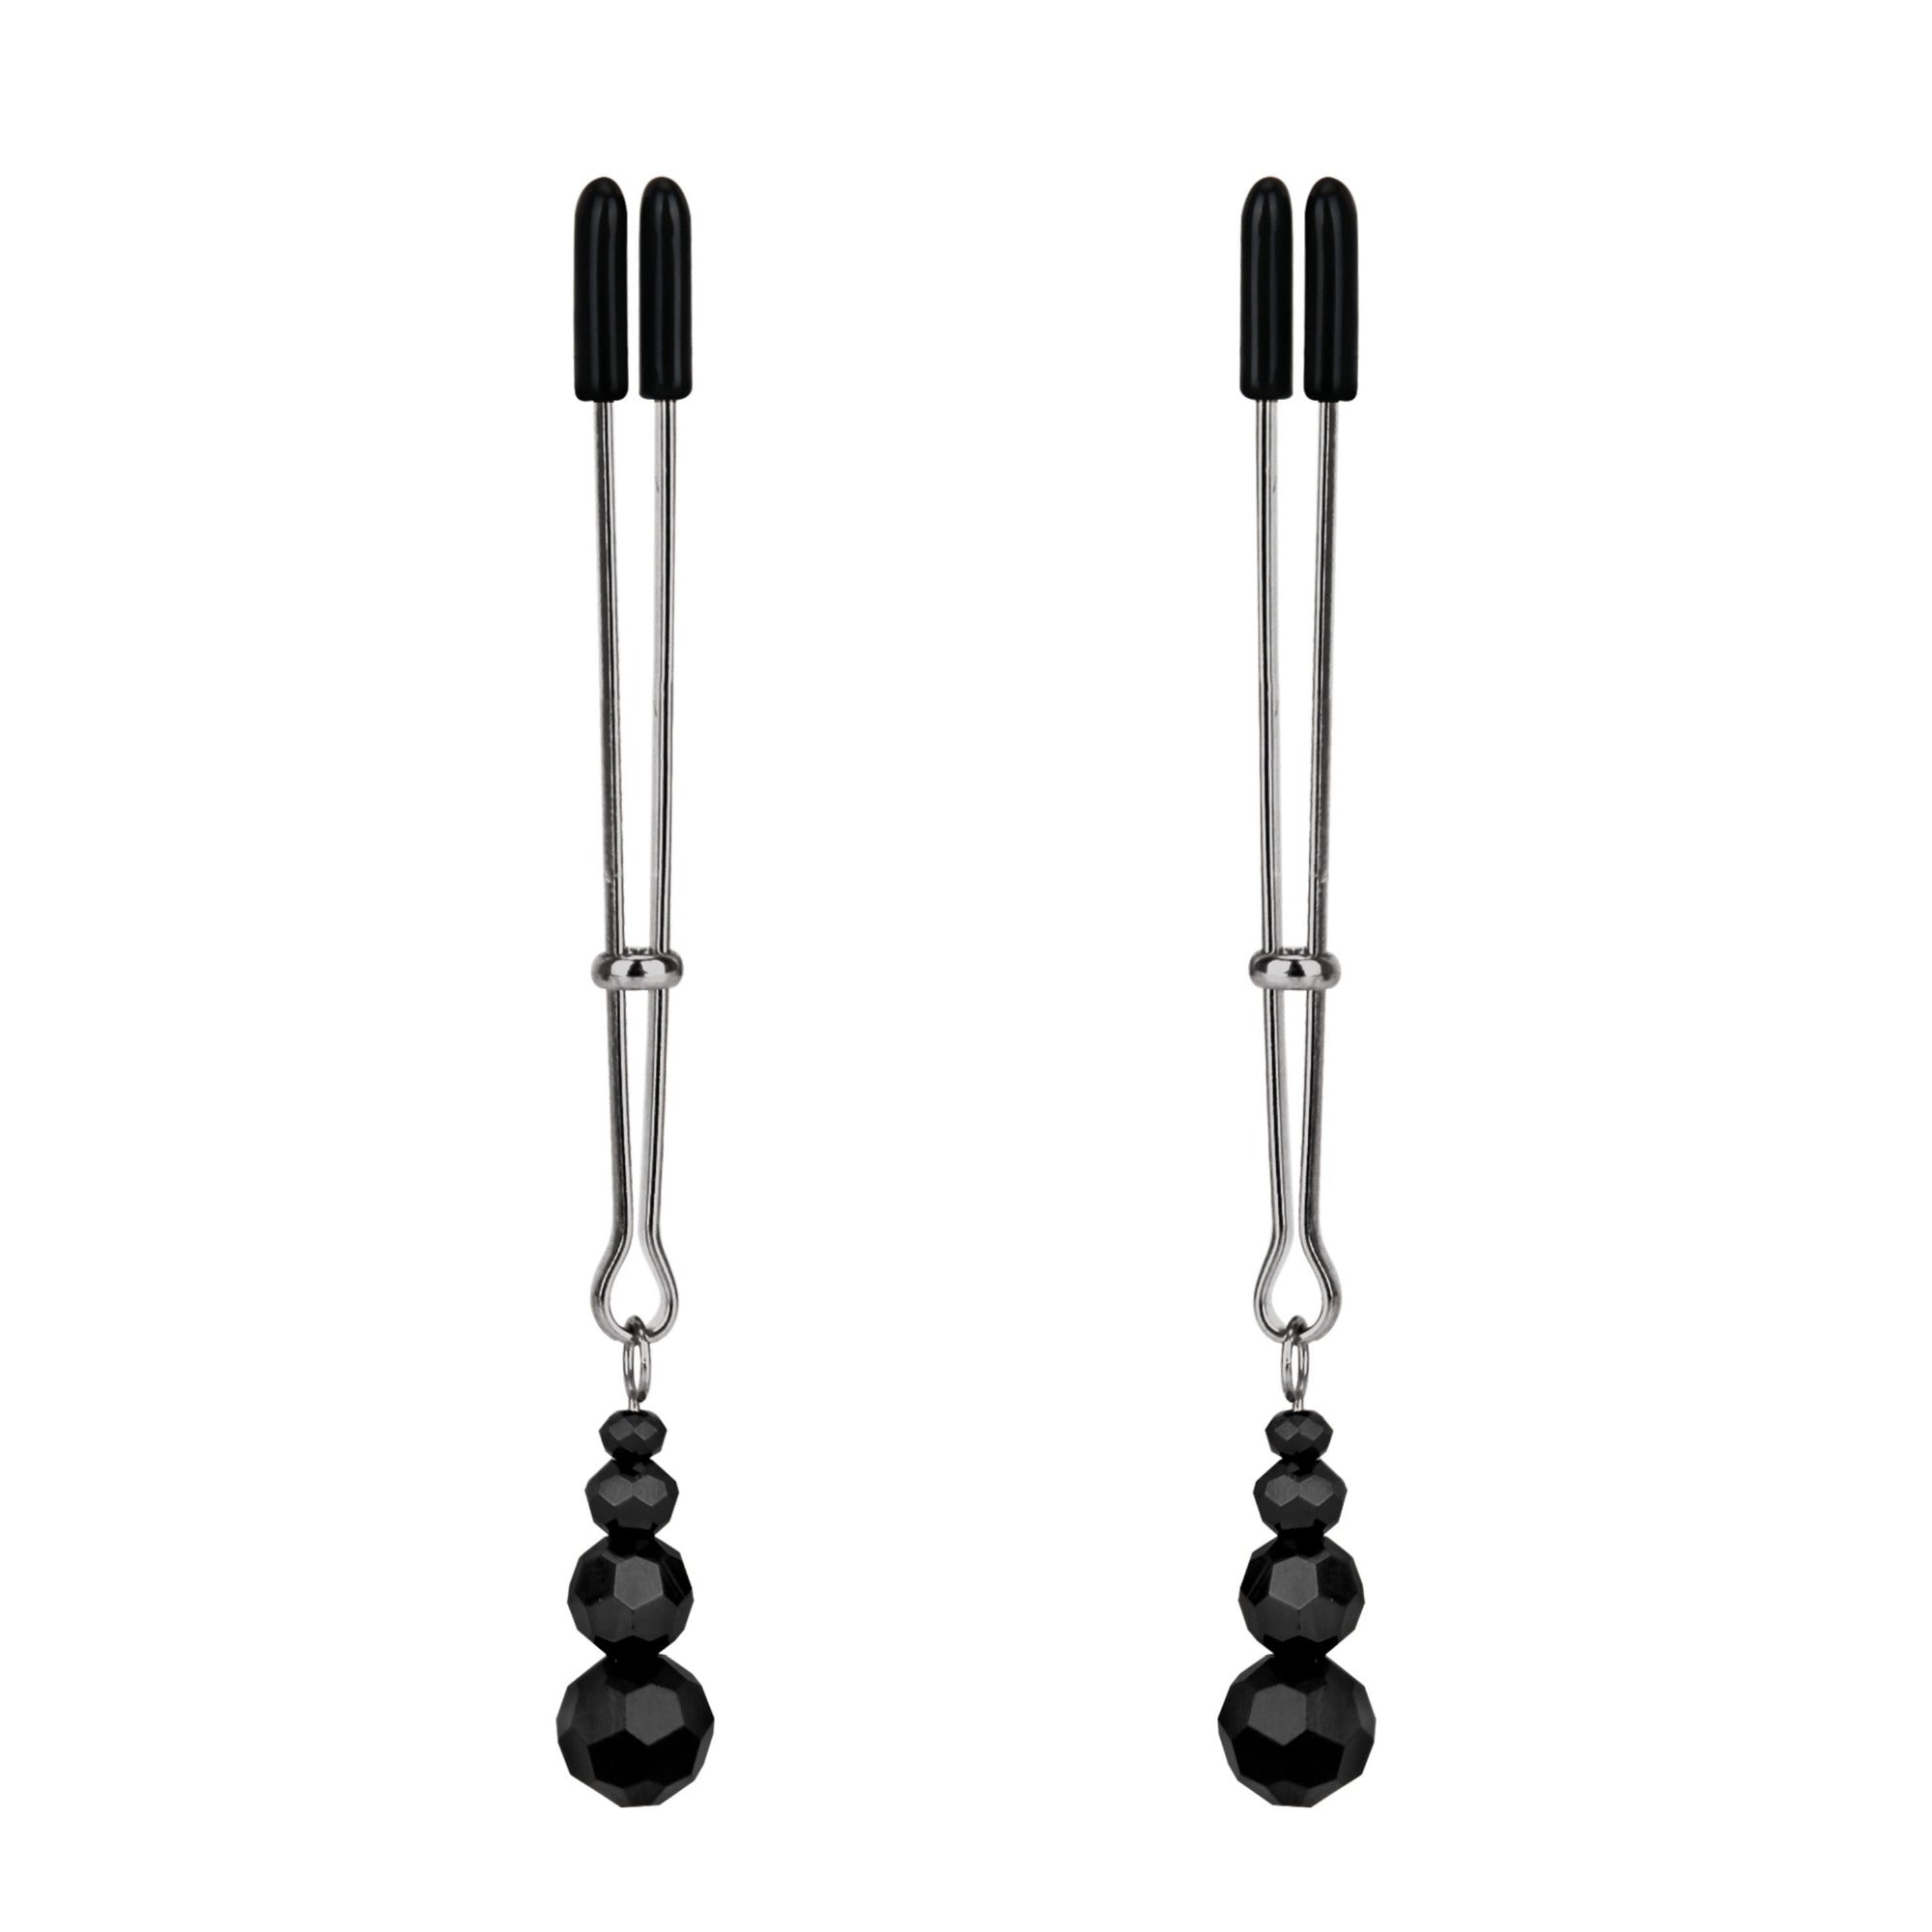 Lux Fetish Adjustable Weighted Tweezer Nipple Clips at glastoy.com